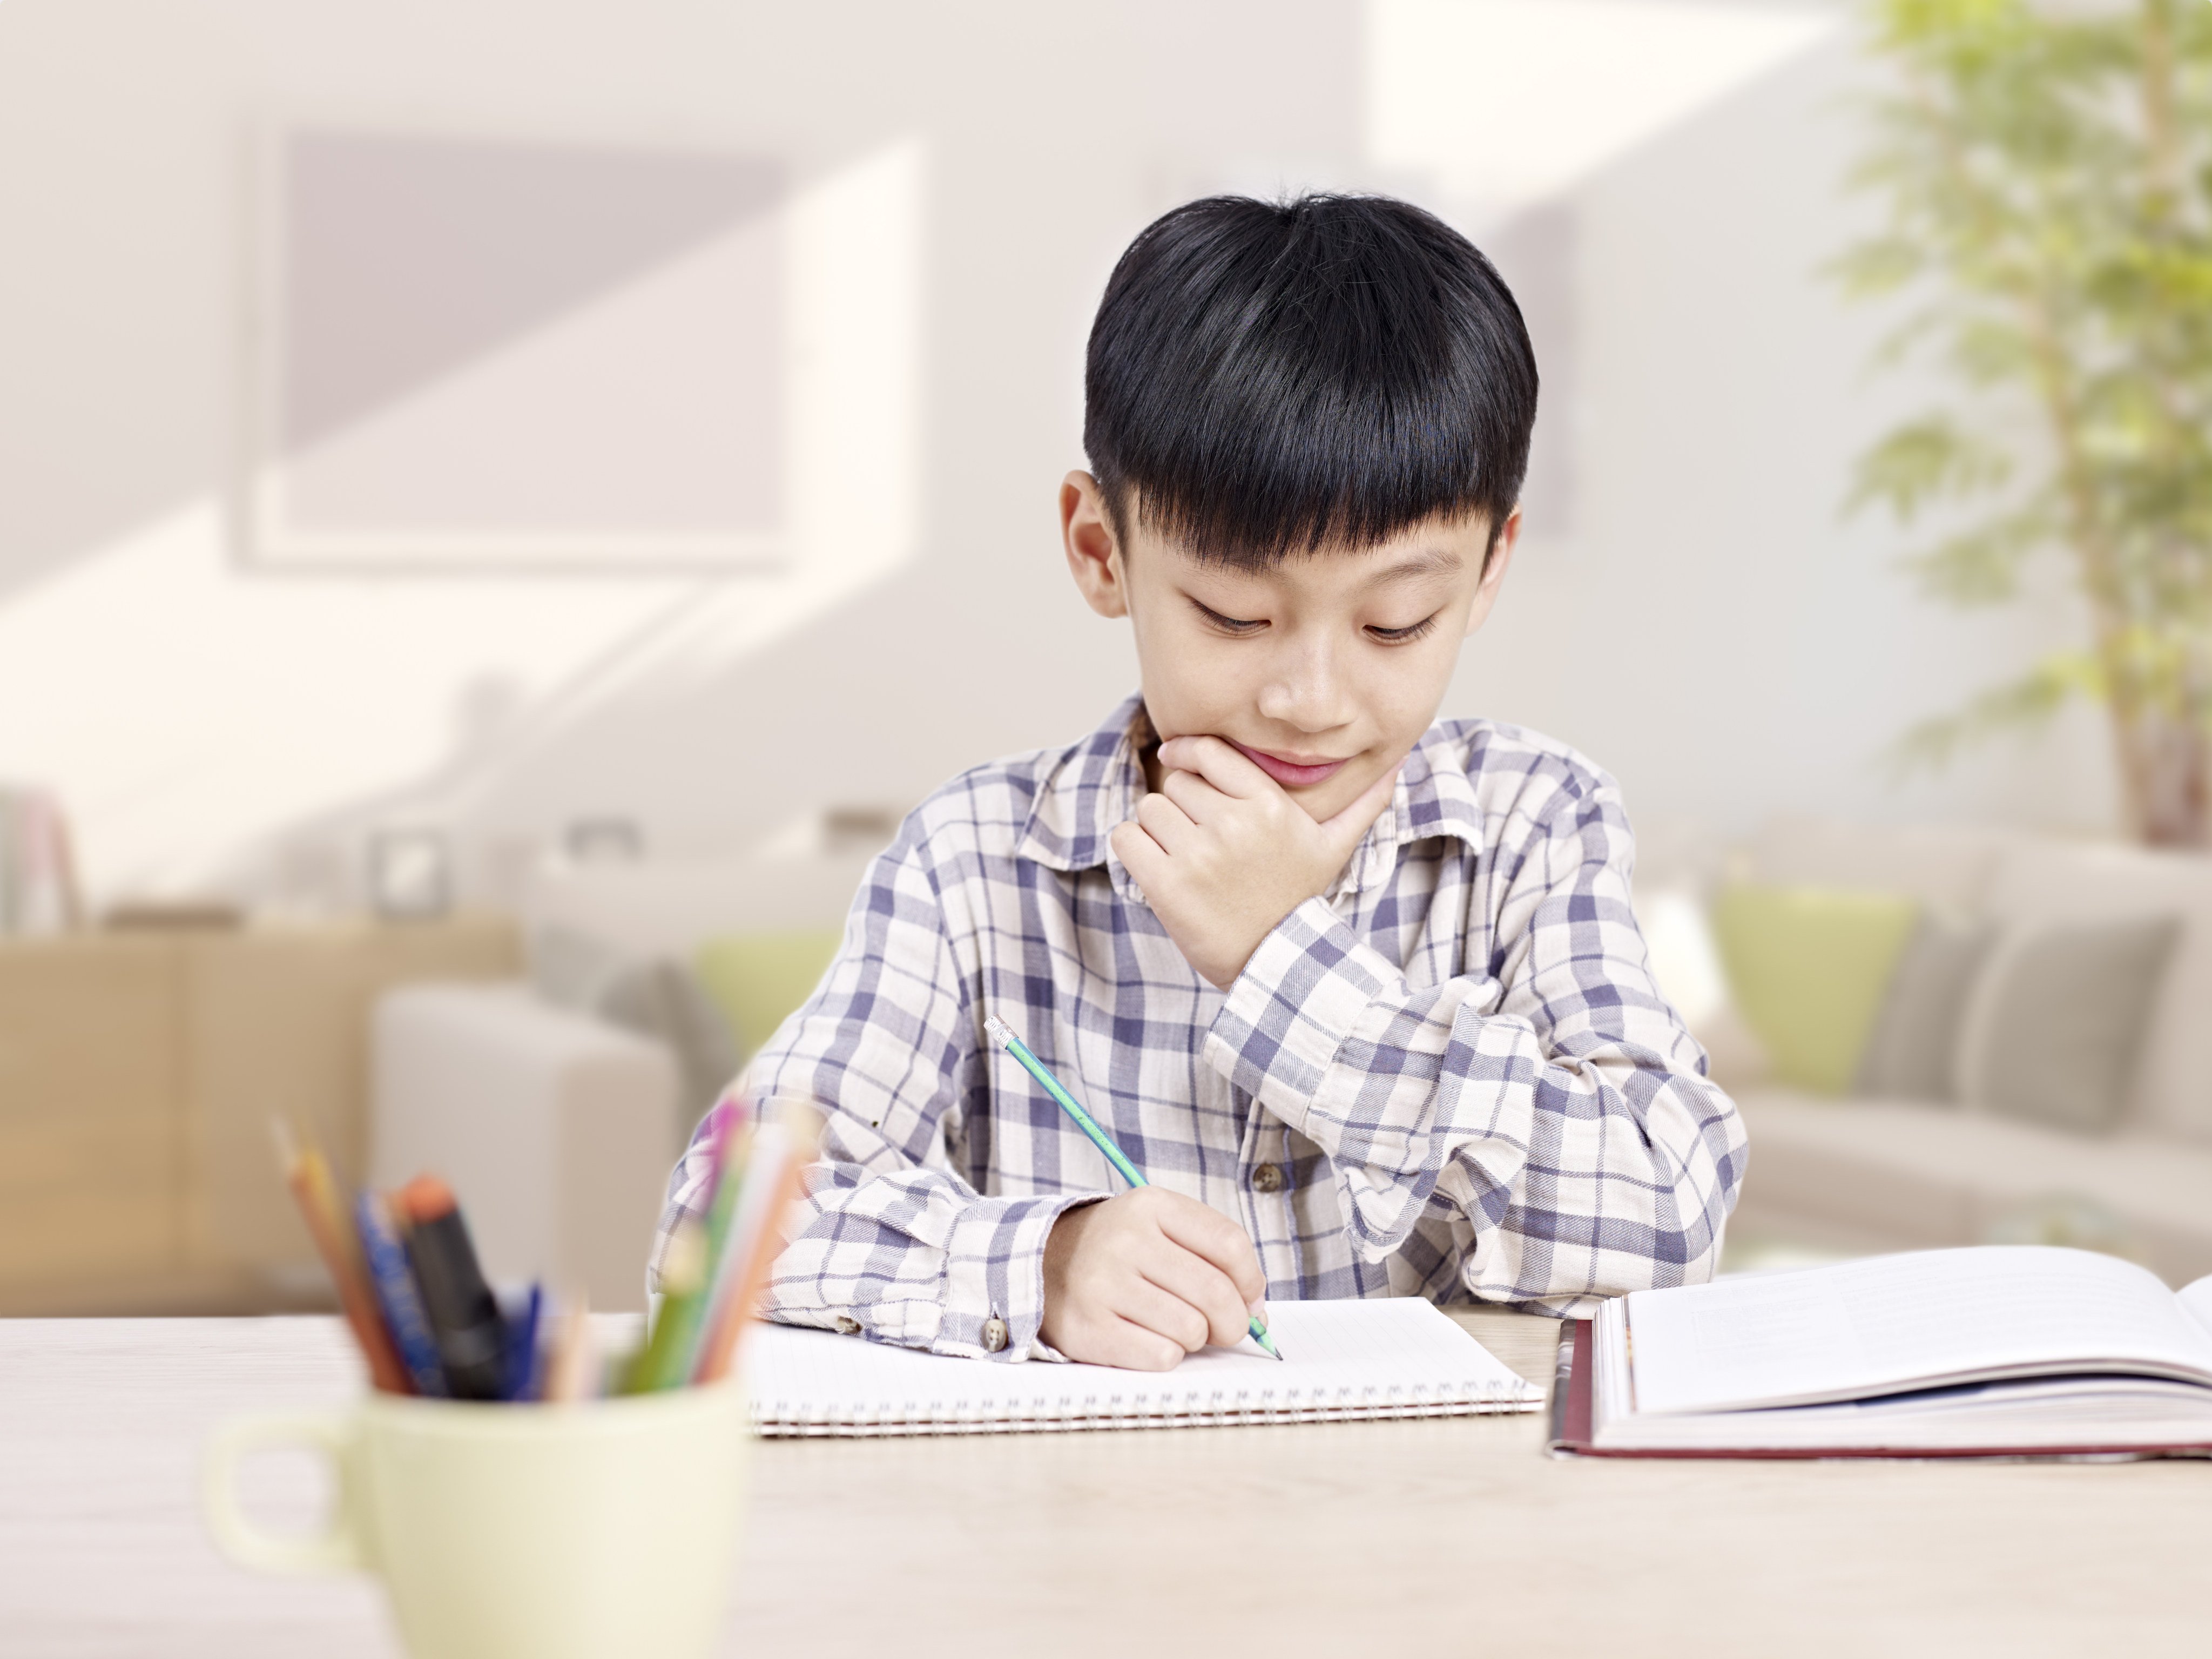 The school says it hopes to reduce the overwhelming academic stress on children. Photo: Shutterstock